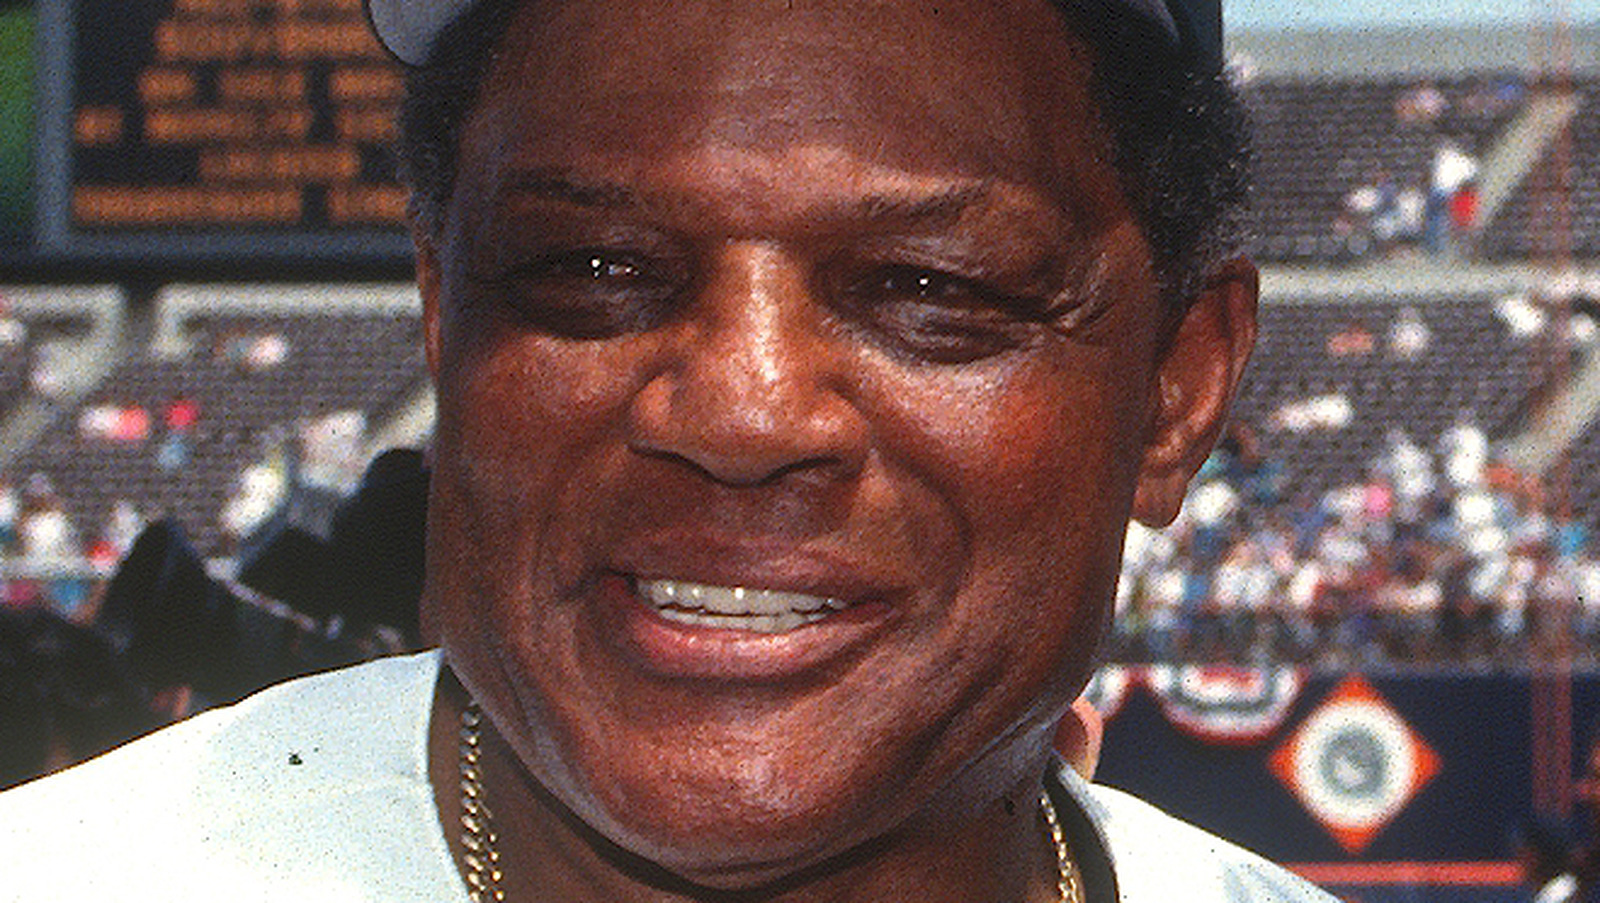 Willie Mays Most Famous Play Was Just A Routine Catch To Him